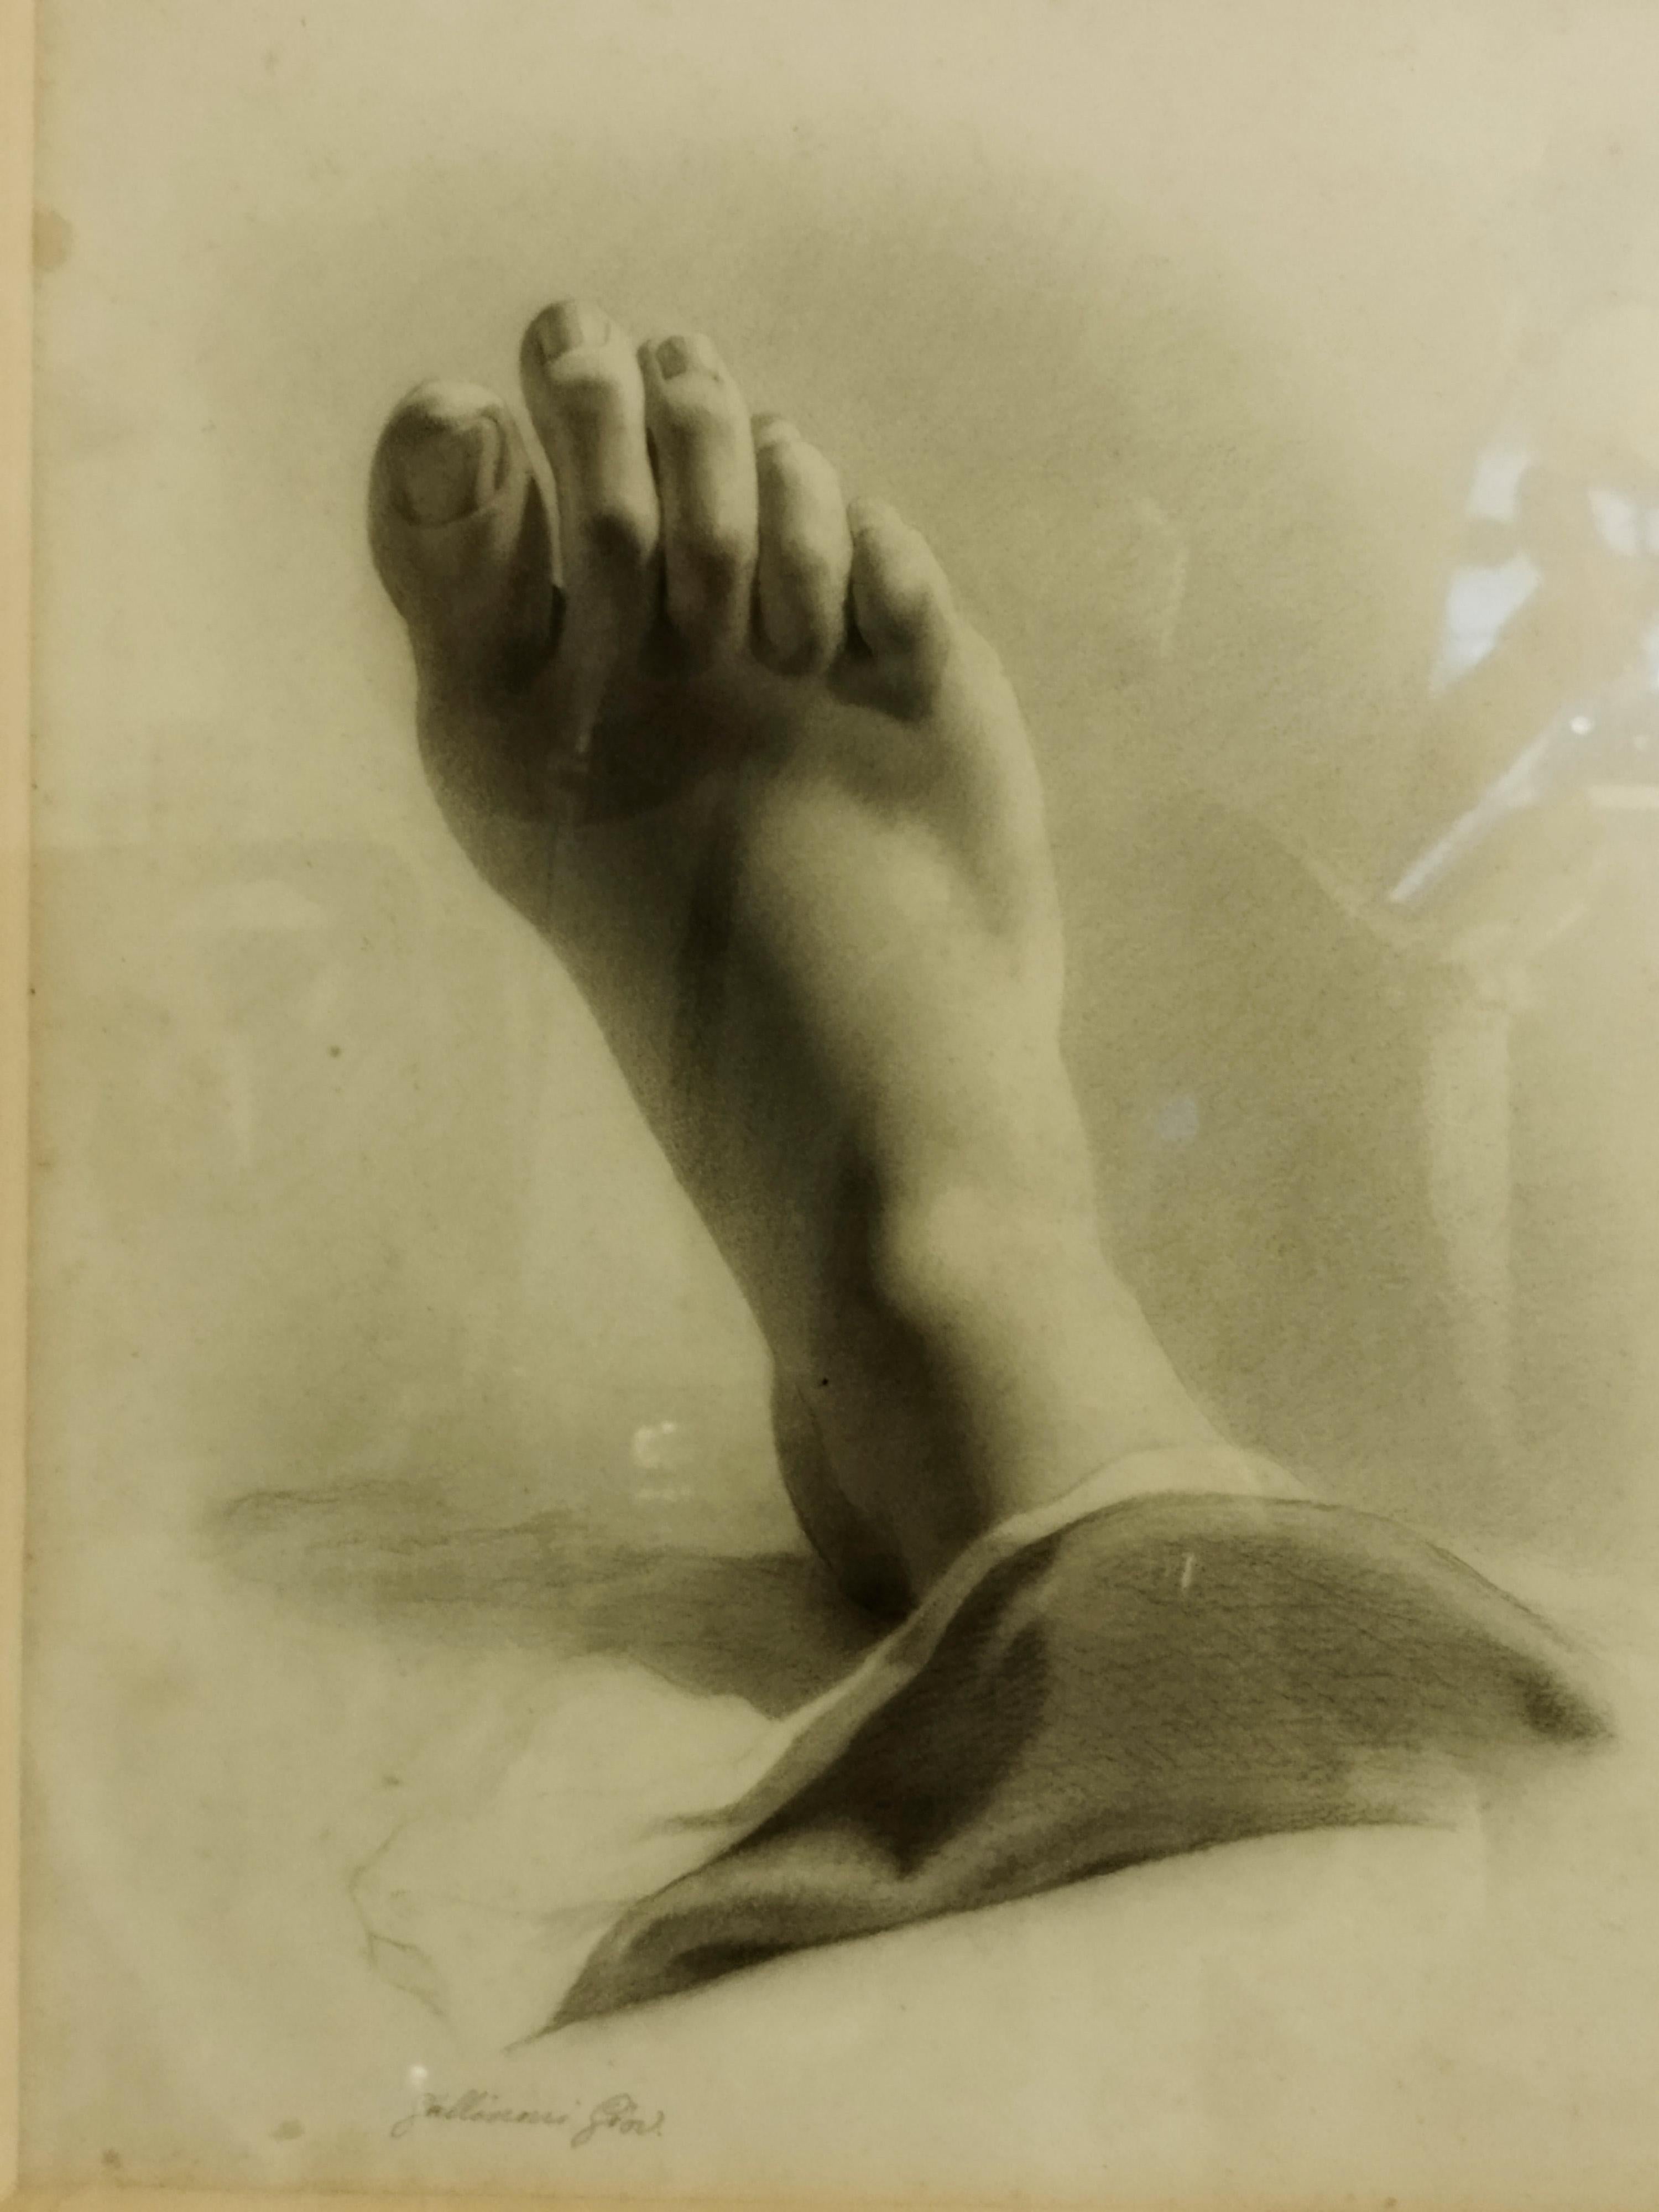 Drawing on paper of anatomical study of a right foot. Work attributed to Gallinoni as it is signed at lower right (see photo). Estimated period first half of the 20th century. Drawing dimensions 34x33 cm.